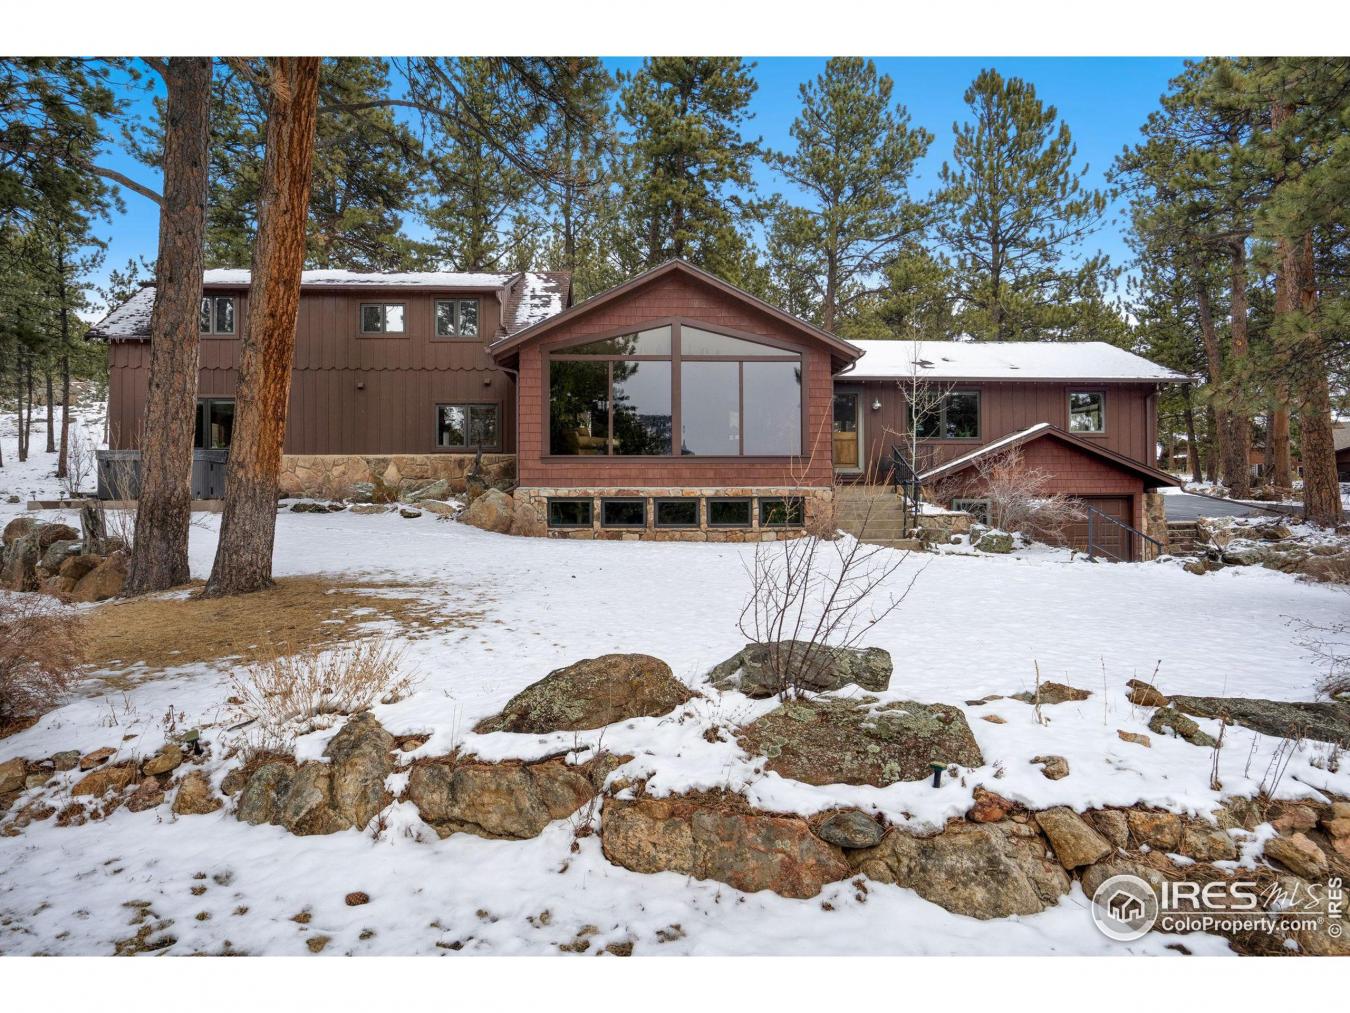 850 East Lane, Estes Park, Colorado, 80517, United States, 4 Bedrooms Bedrooms, ,1 BathroomBathrooms,Residential,For Sale,850 East Lane,1477870